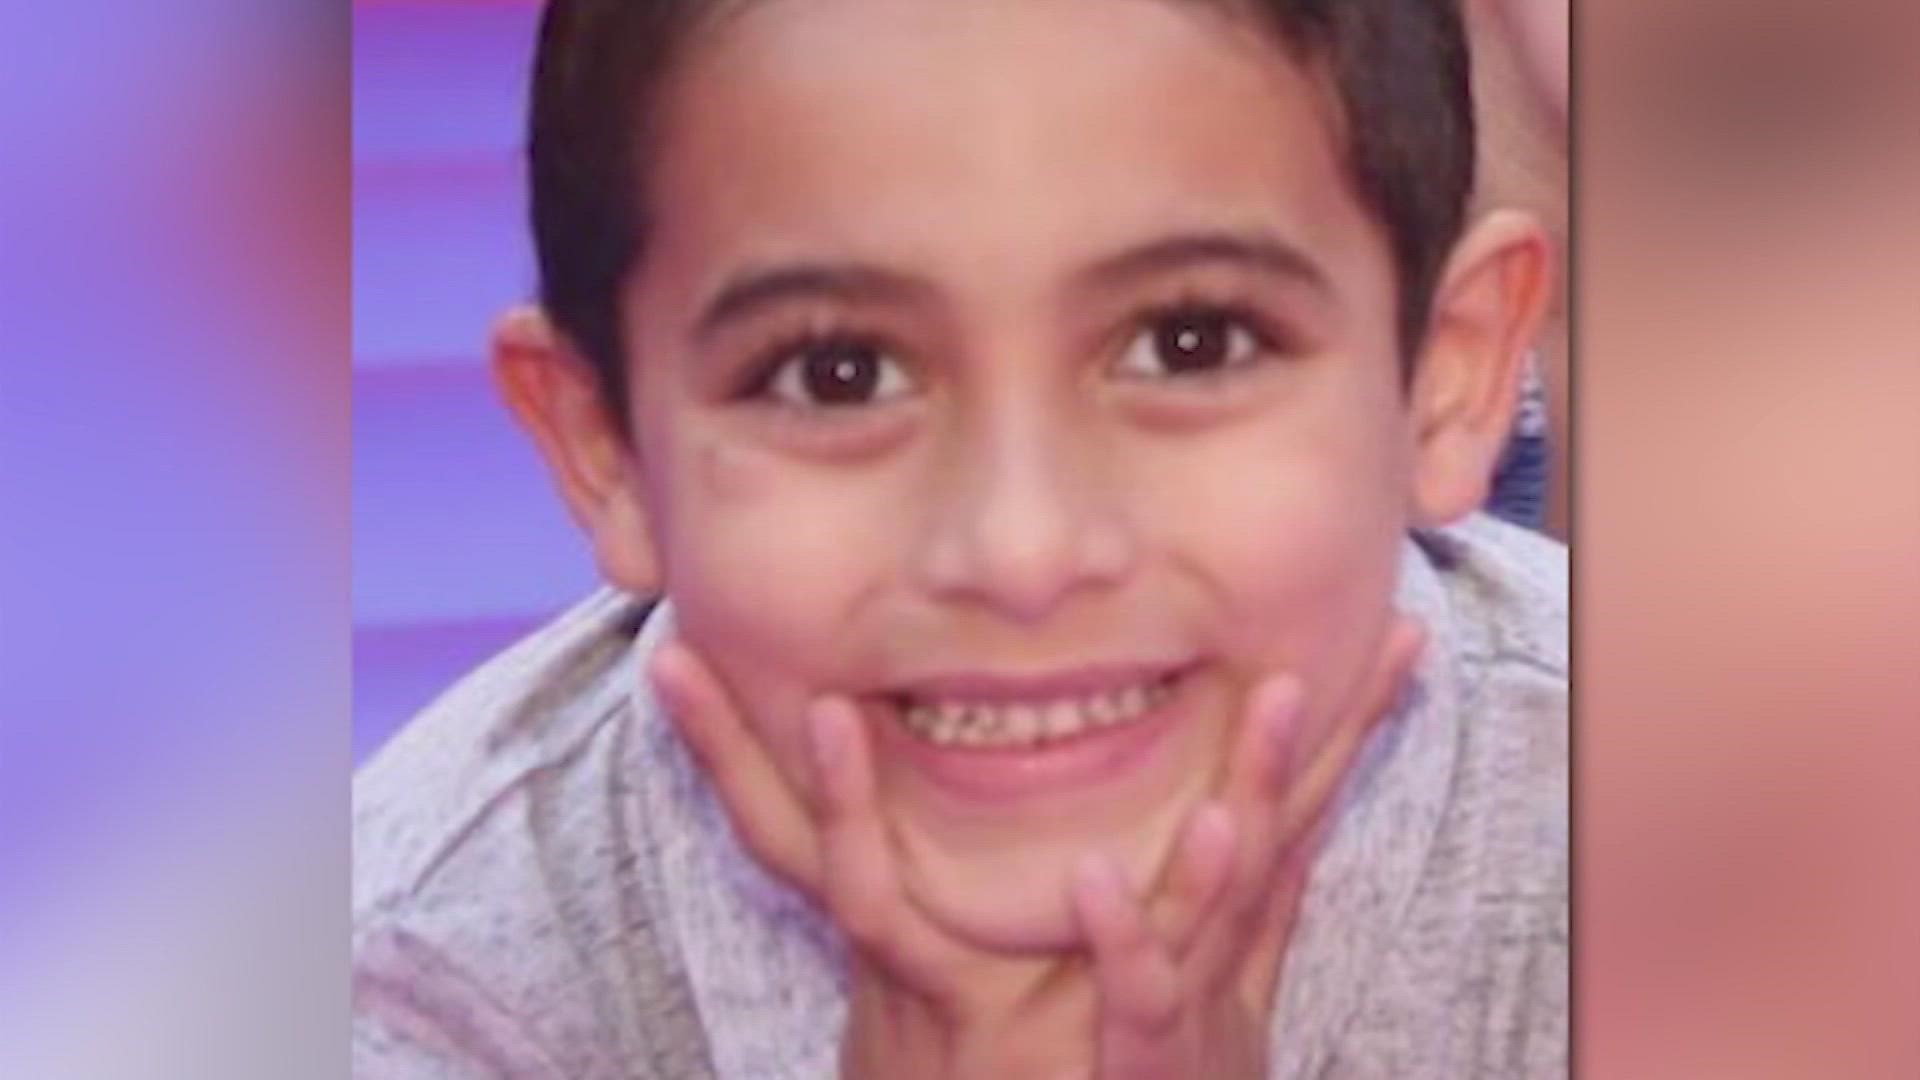 Six-year-old Jorge "Jo-Jo" Morales has been missing from Miami, Florida since Aug. 27.